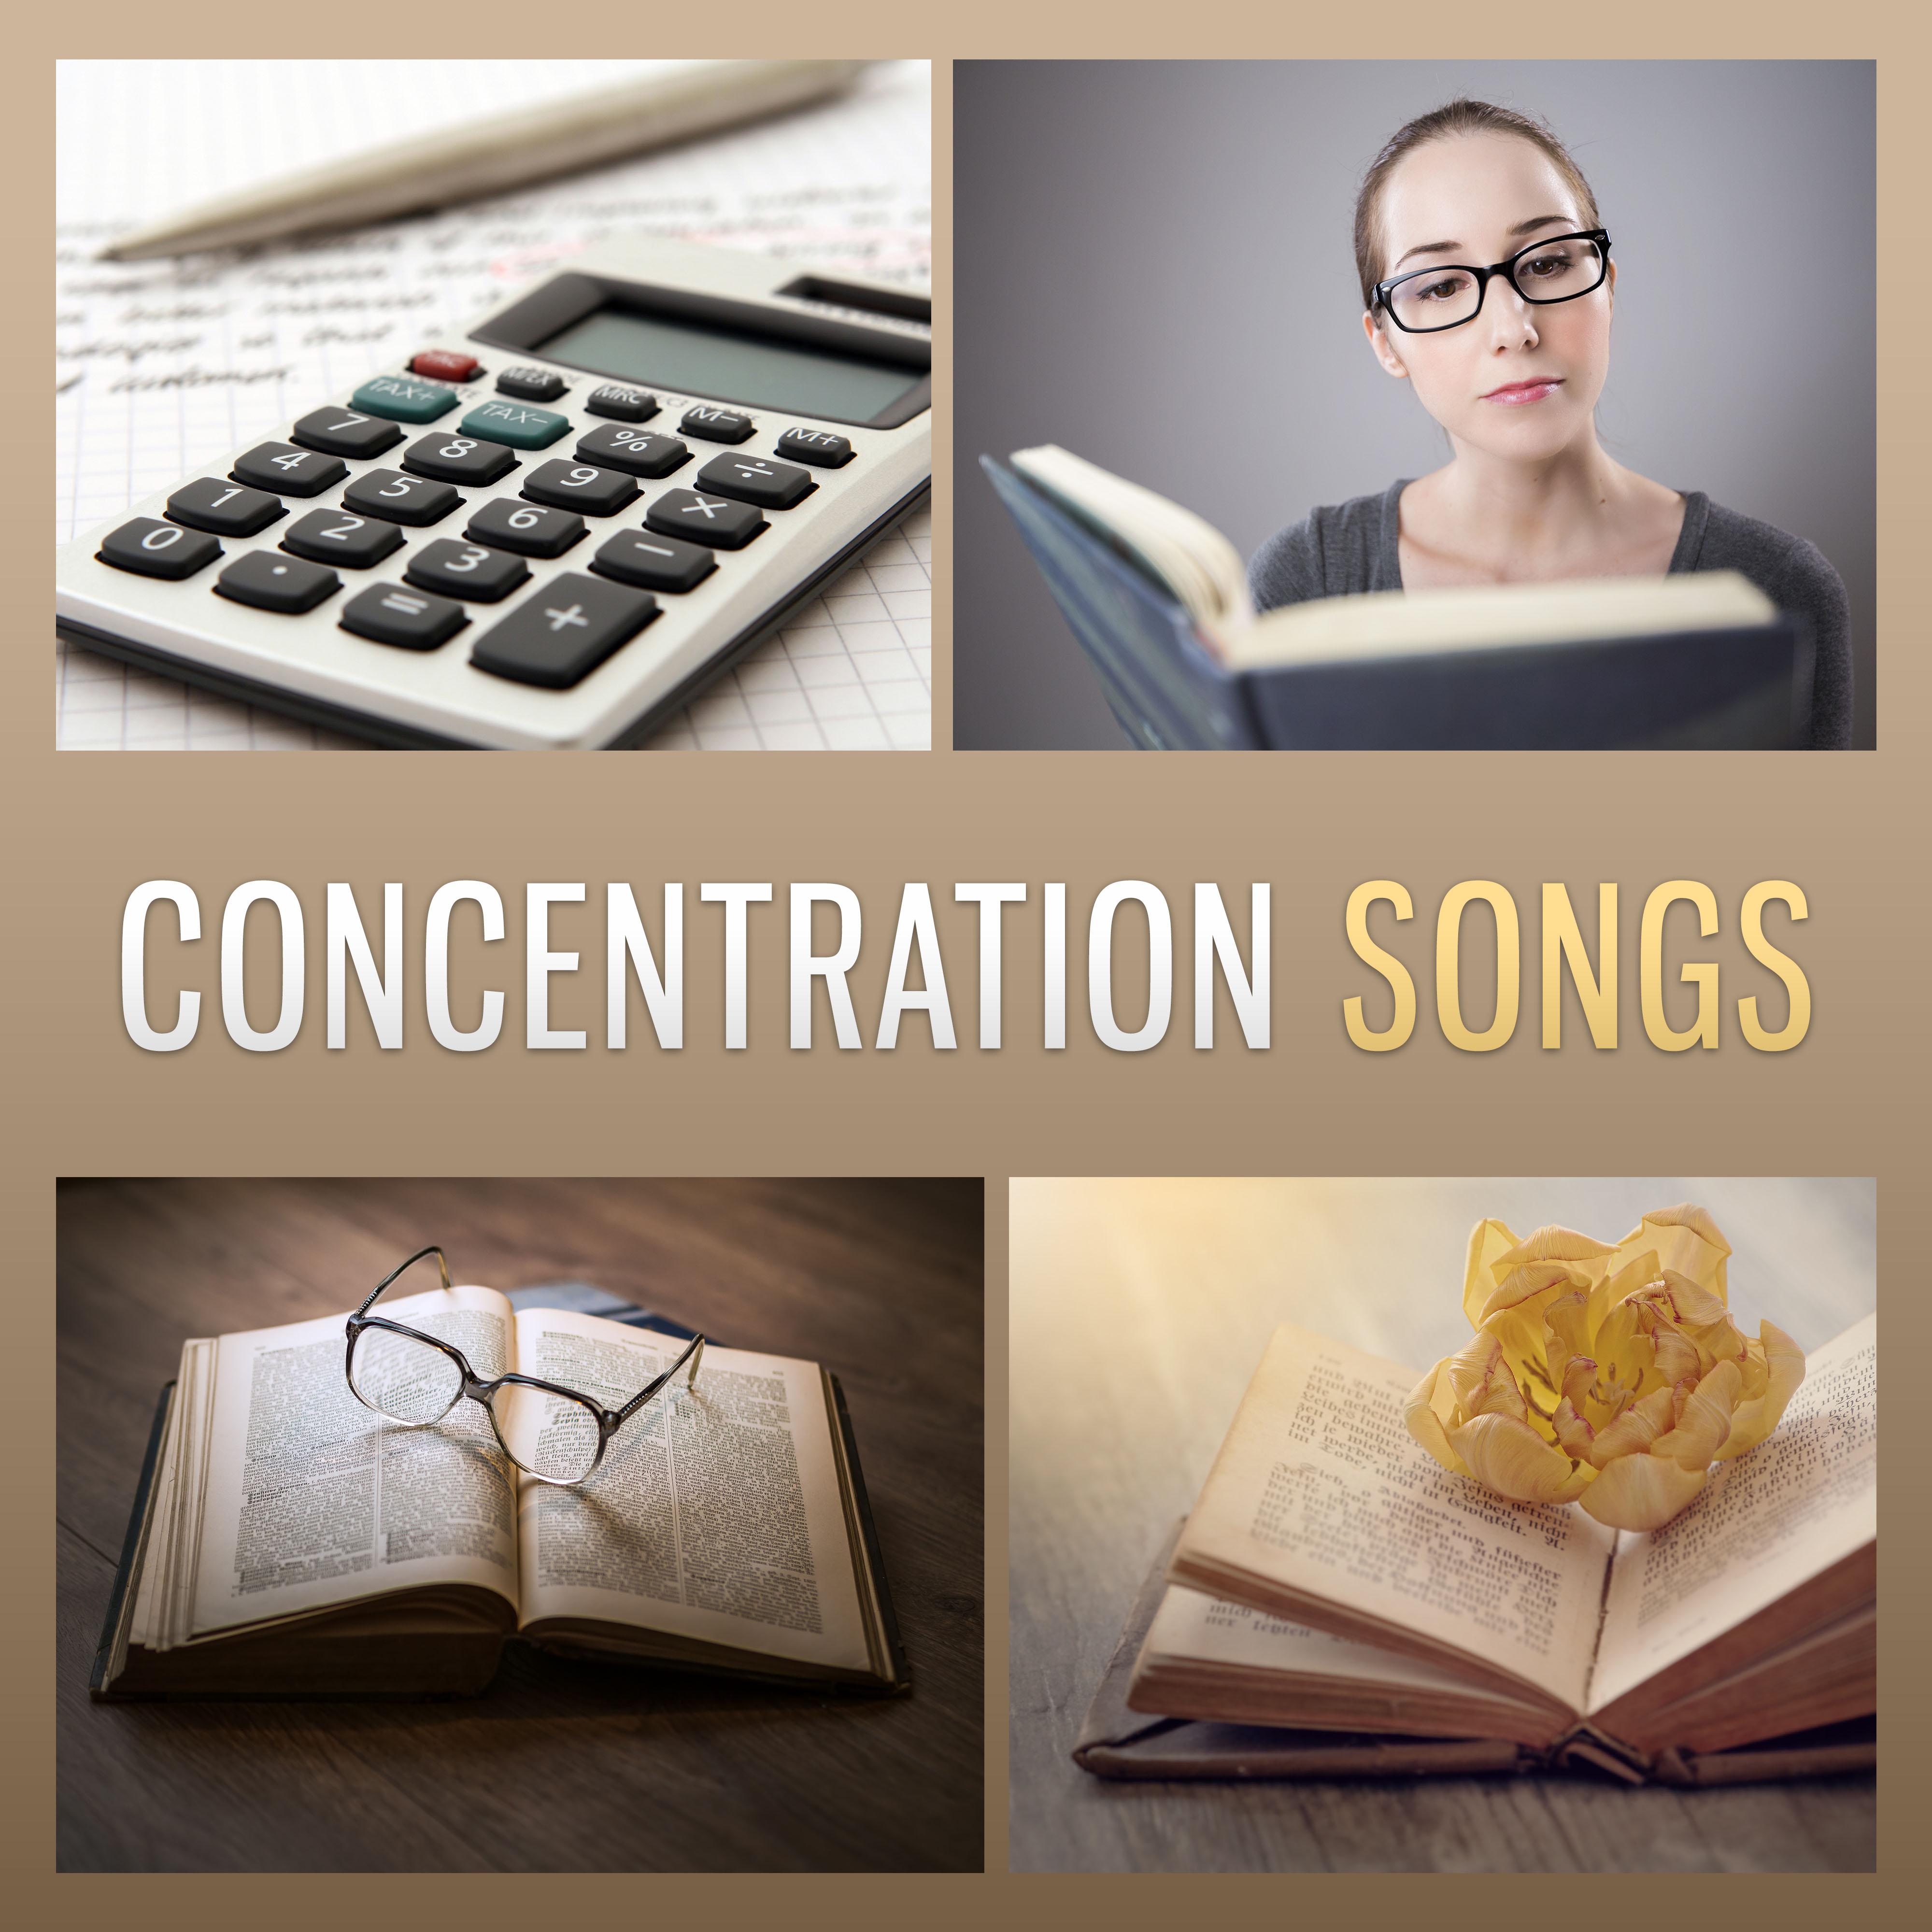 Concentration Songs  Classical Melodies to Study, Music for Listening, Learning, Music to Concentration, Bach to Intensive Learning